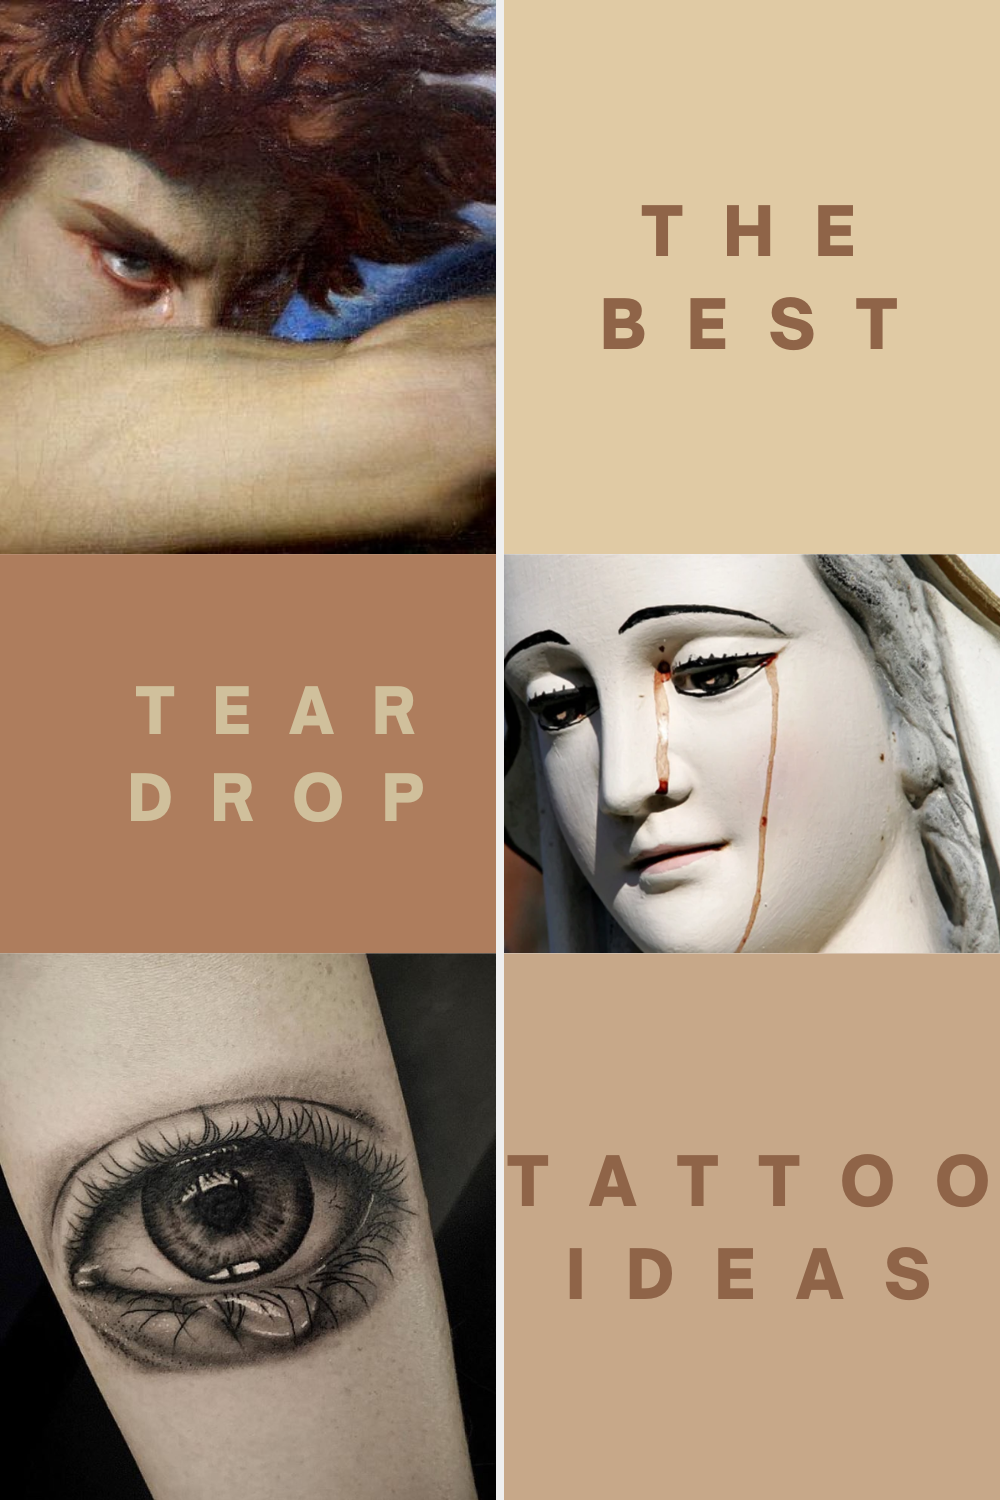 Teardrop Tattoo Ideas for Representing Wrath, Anger, and Despair Top Beauty Magazines